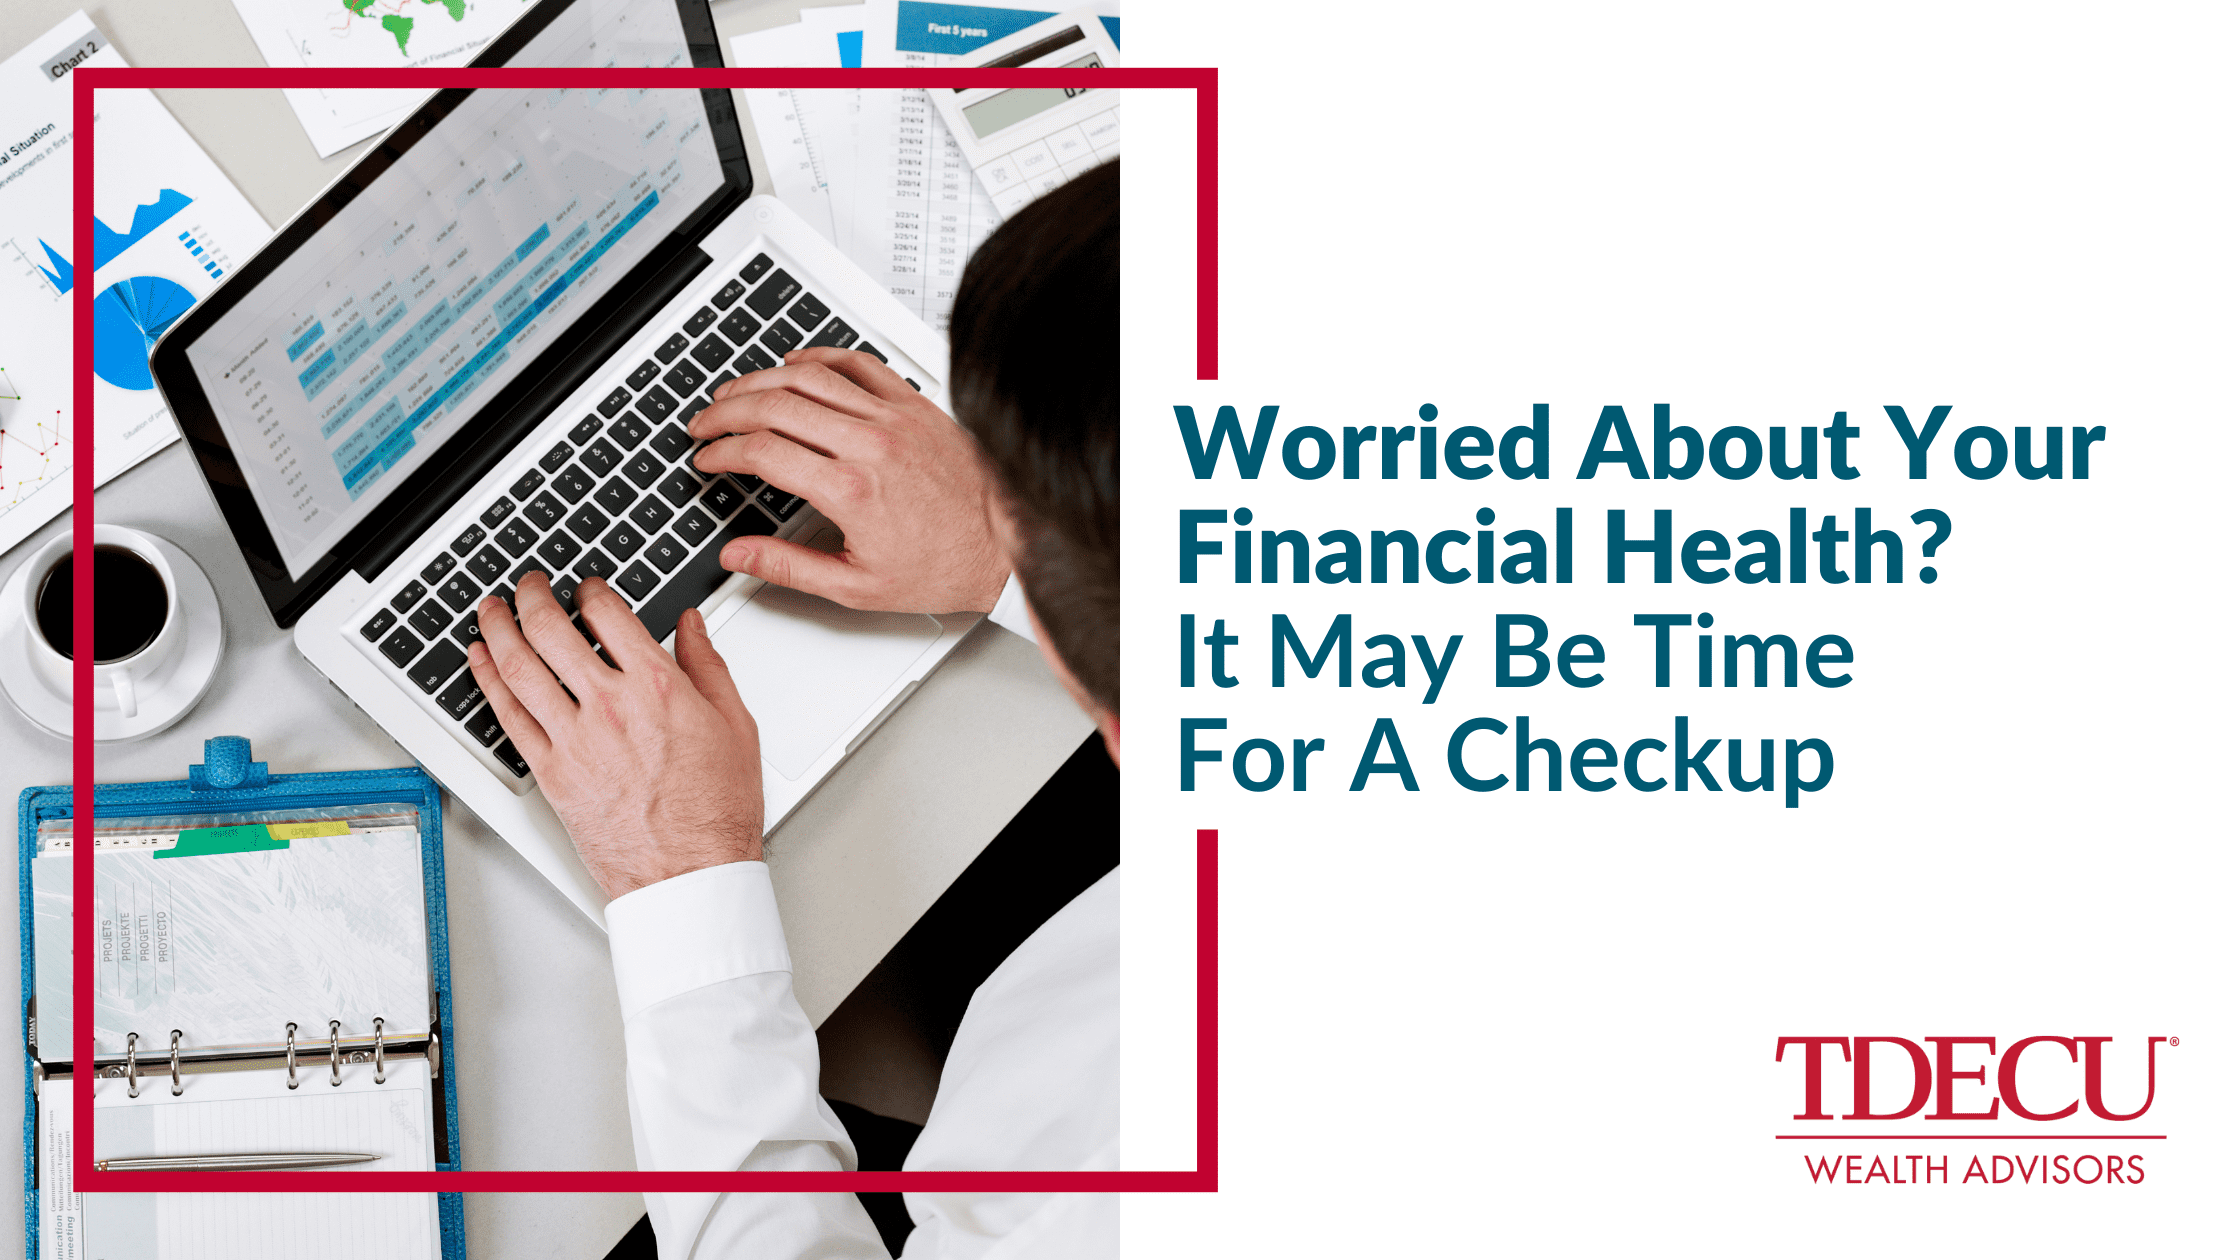 Worried About Your Financial Health? It May Be Time For A Checkup